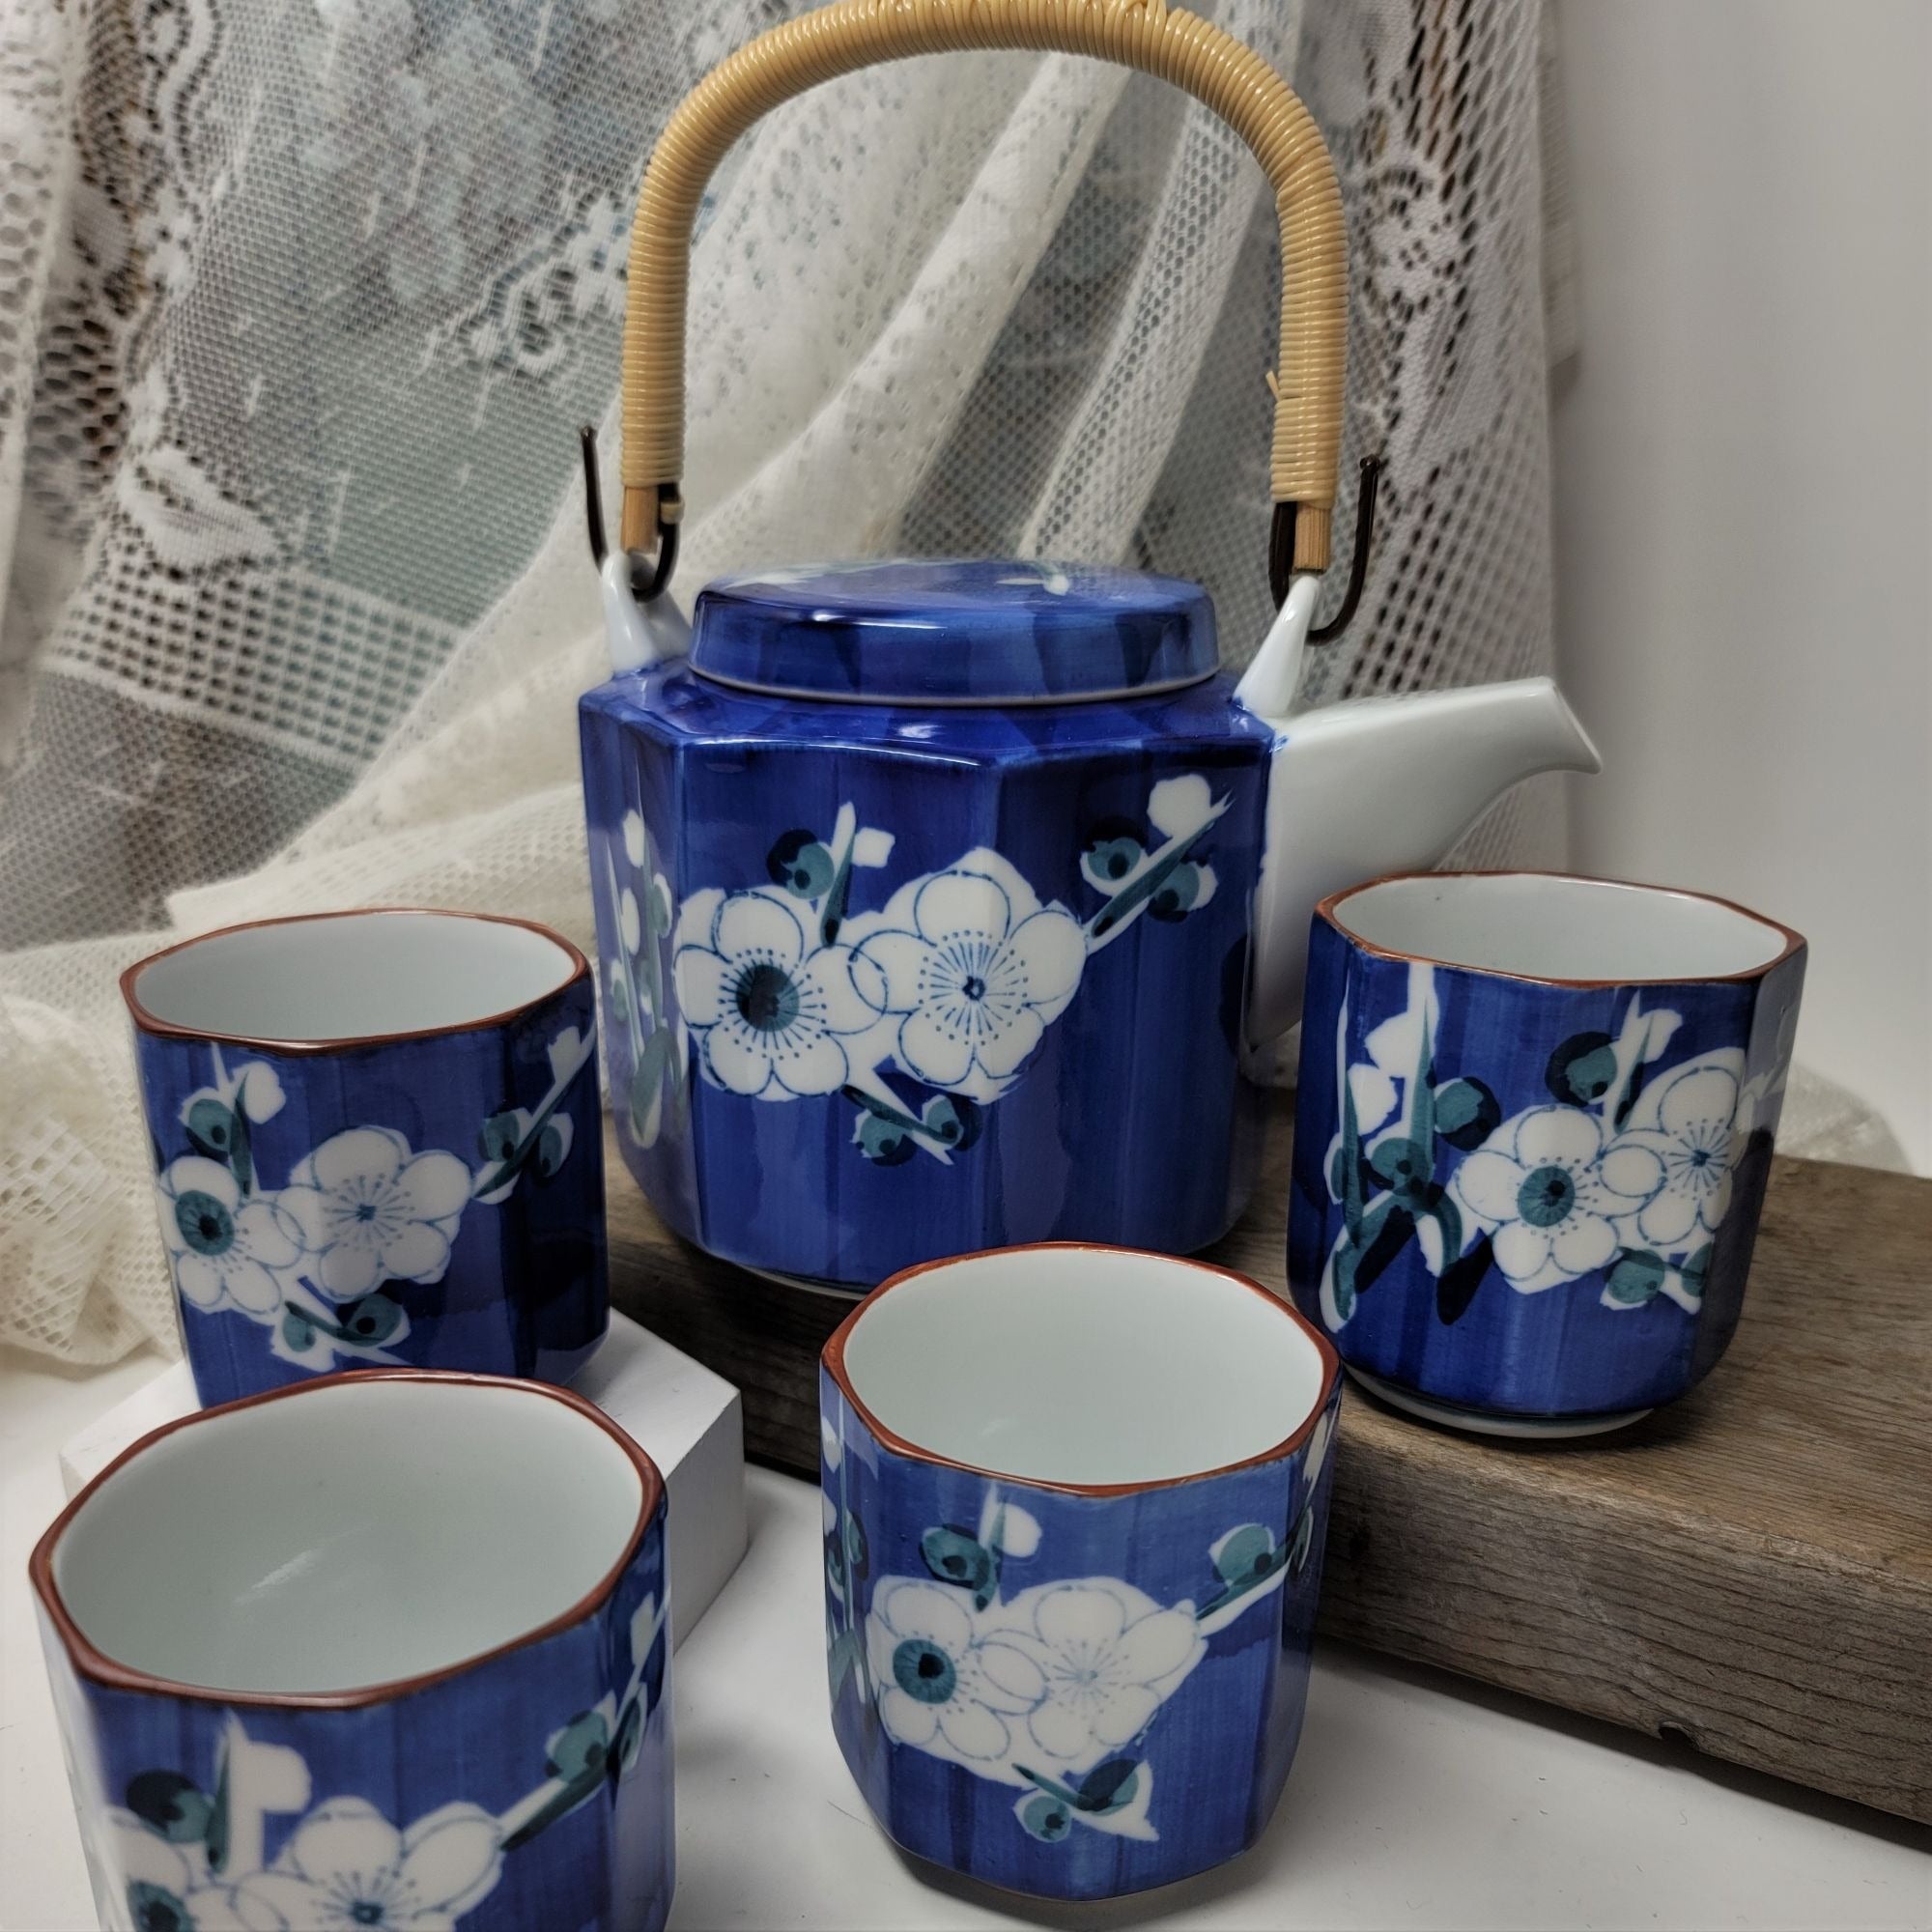 Japanese White Blue Floral Hand Painted Tea Pot & 4 Cup Set Made in Japan Vintage